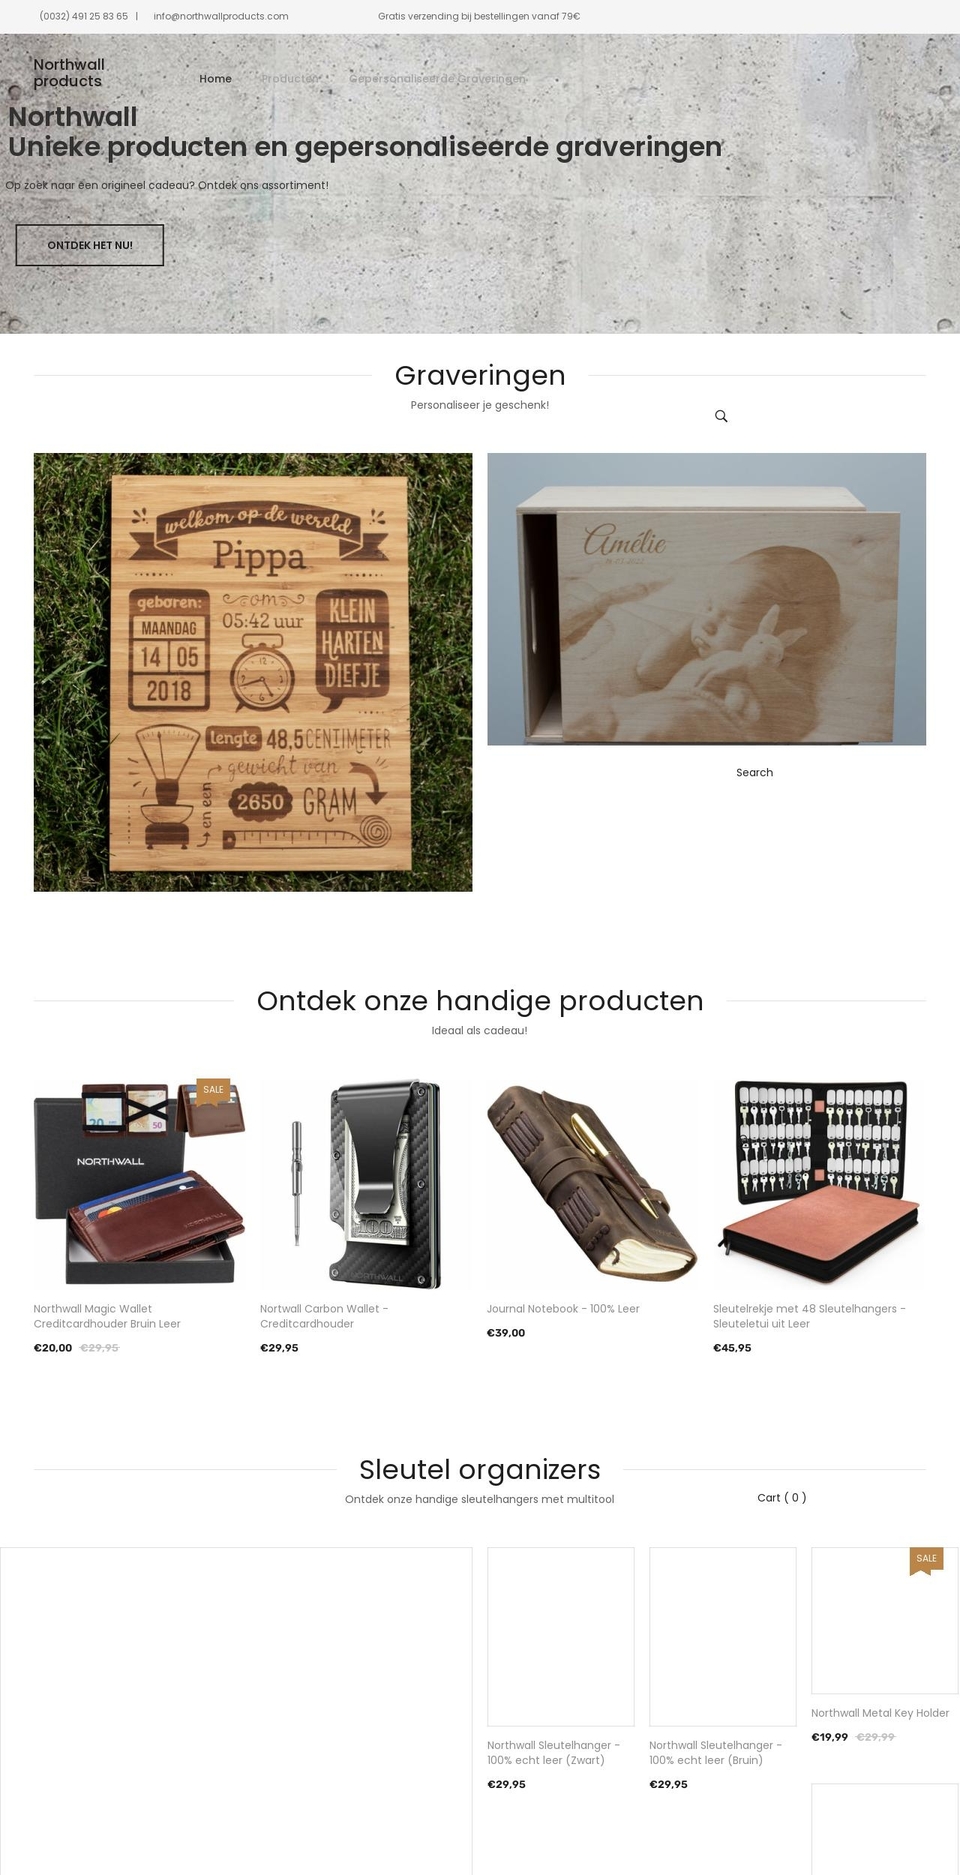 furniture Shopify theme site example northwallproducts.com